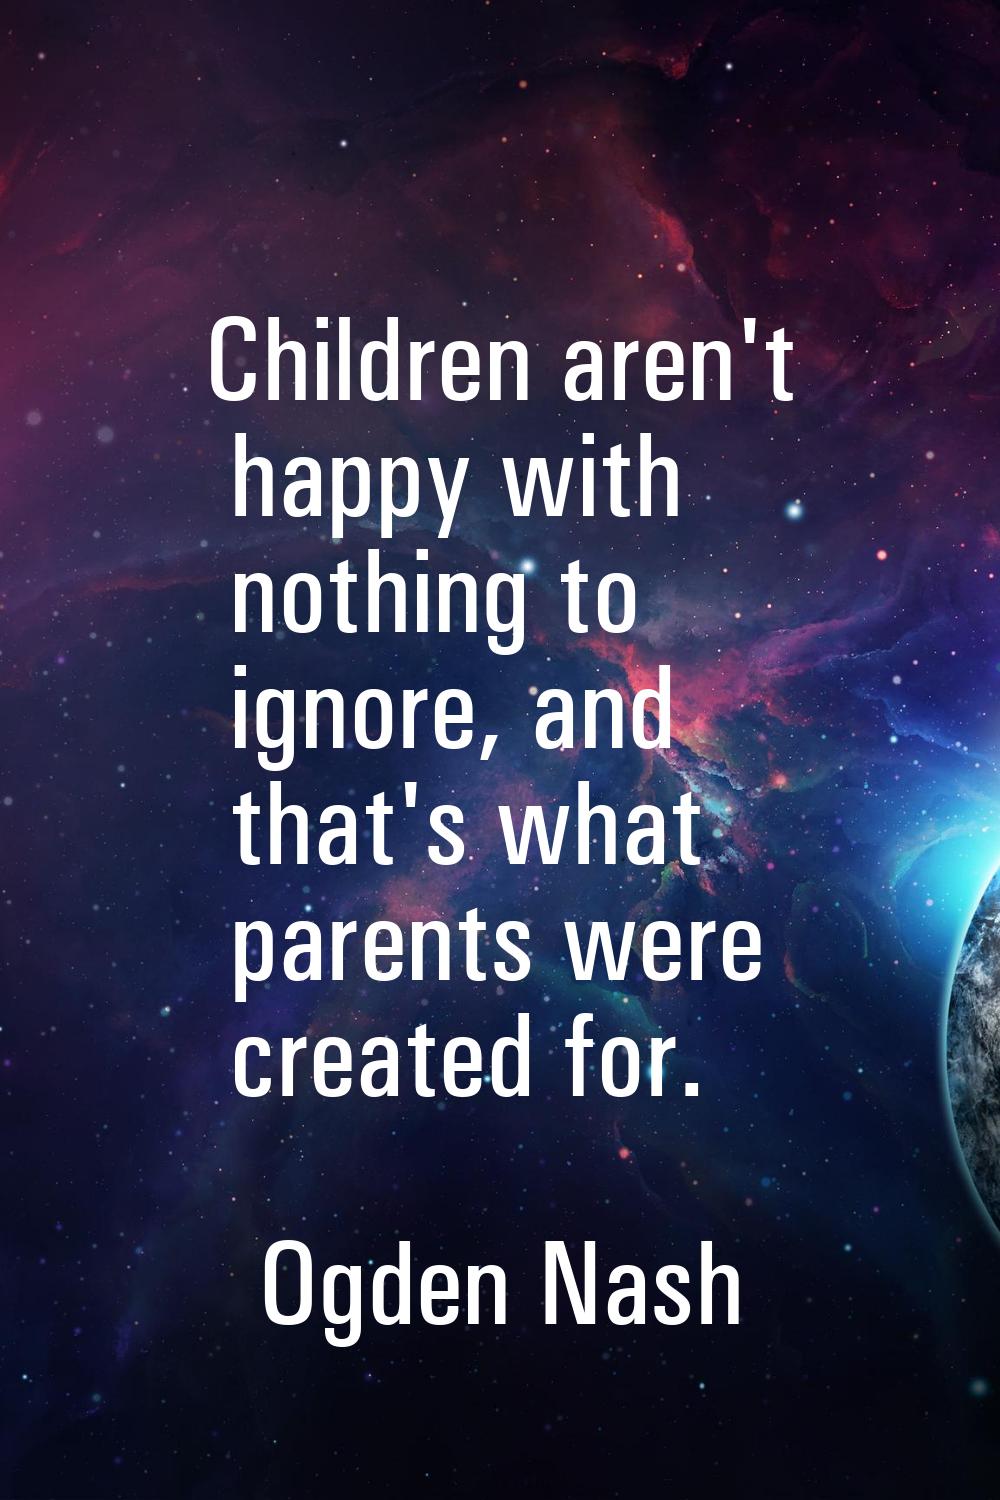 Children aren't happy with nothing to ignore, and that's what parents were created for.